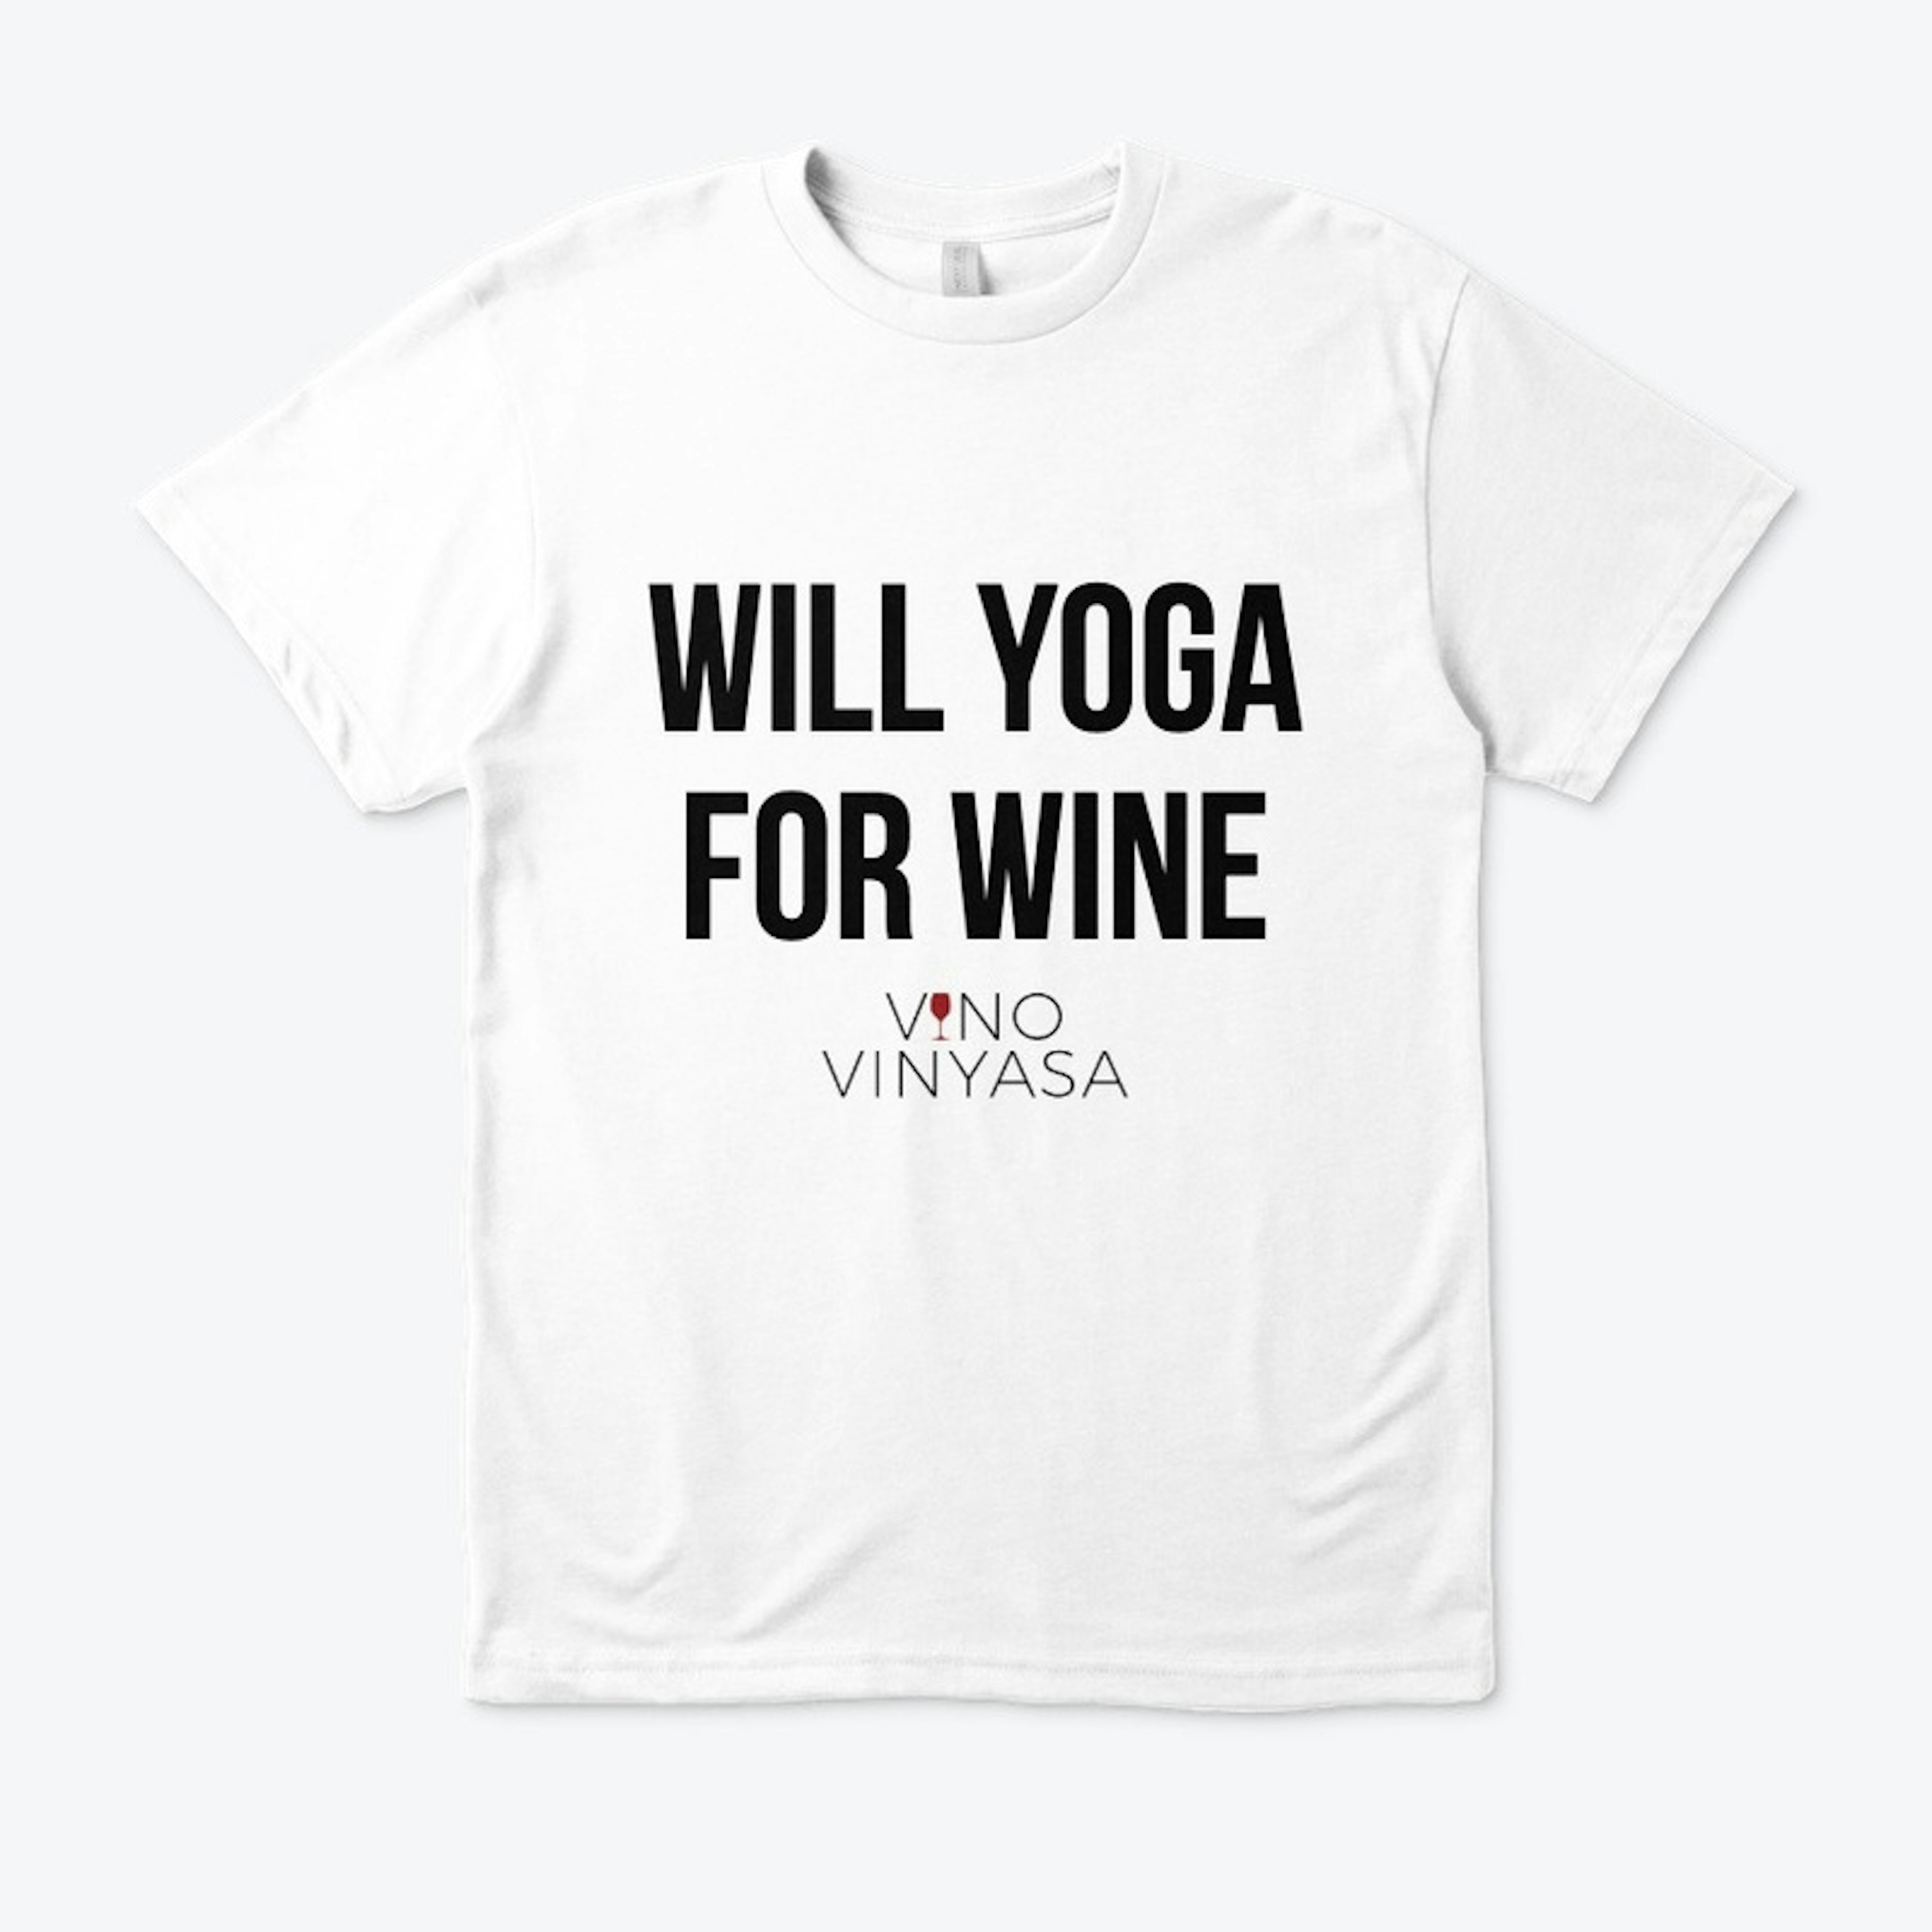 Will Yoga for Wine!